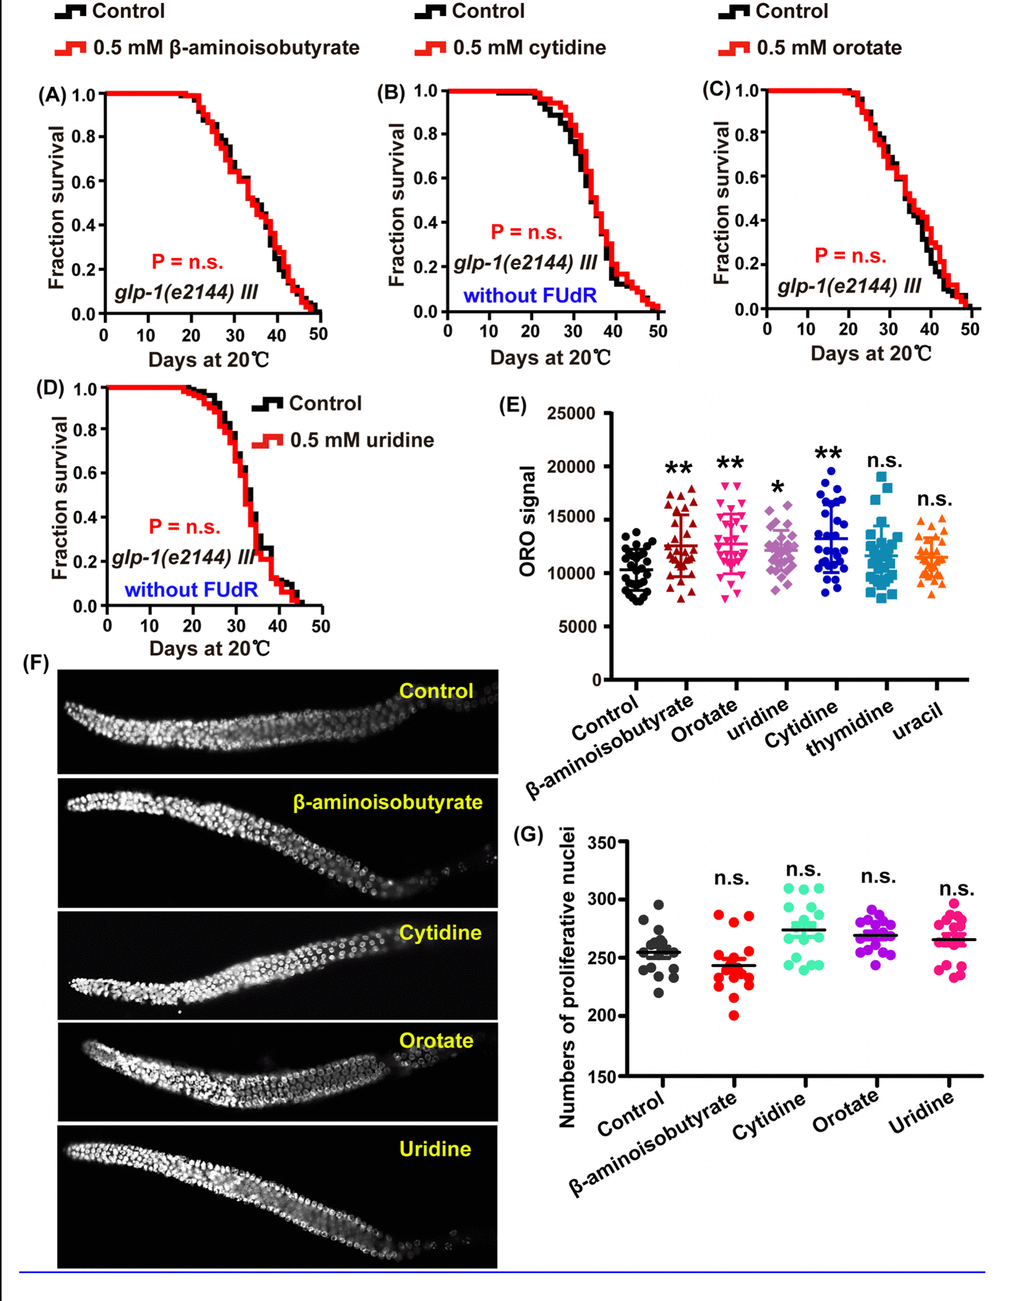 Intermediate metabolites in pyrimidine metabolism influence the lifespan of C. elegans through regulating reproductive signals. (A–D) Lifespan analysis of glp-1 (e2144) animals treated with 0.5 mM (A) β-aminoisobutyrate (red), (B) cytidine (red), (C) orotate (red), (D) uridine (red), and water (black) on heat-inactivated E. coli OP50 (P value by log-rank test). The replicated data are summarized in Supplementary Table 1. (E) Quantification of ORO staining. Mean ± SD.; n ≥ 30 (Student’s t test). (F) DAPI-stained image of the gonads of N2 worms treated with 0.5 mM β-aminoisobutyrate, cytidine, orotate, and uridine and the untreated control. (G) Quantification of the germline stem cells in wild-type N2 worms treated with or without 0.5 mM of the metabolites. P values were calculated using Student’s t test.